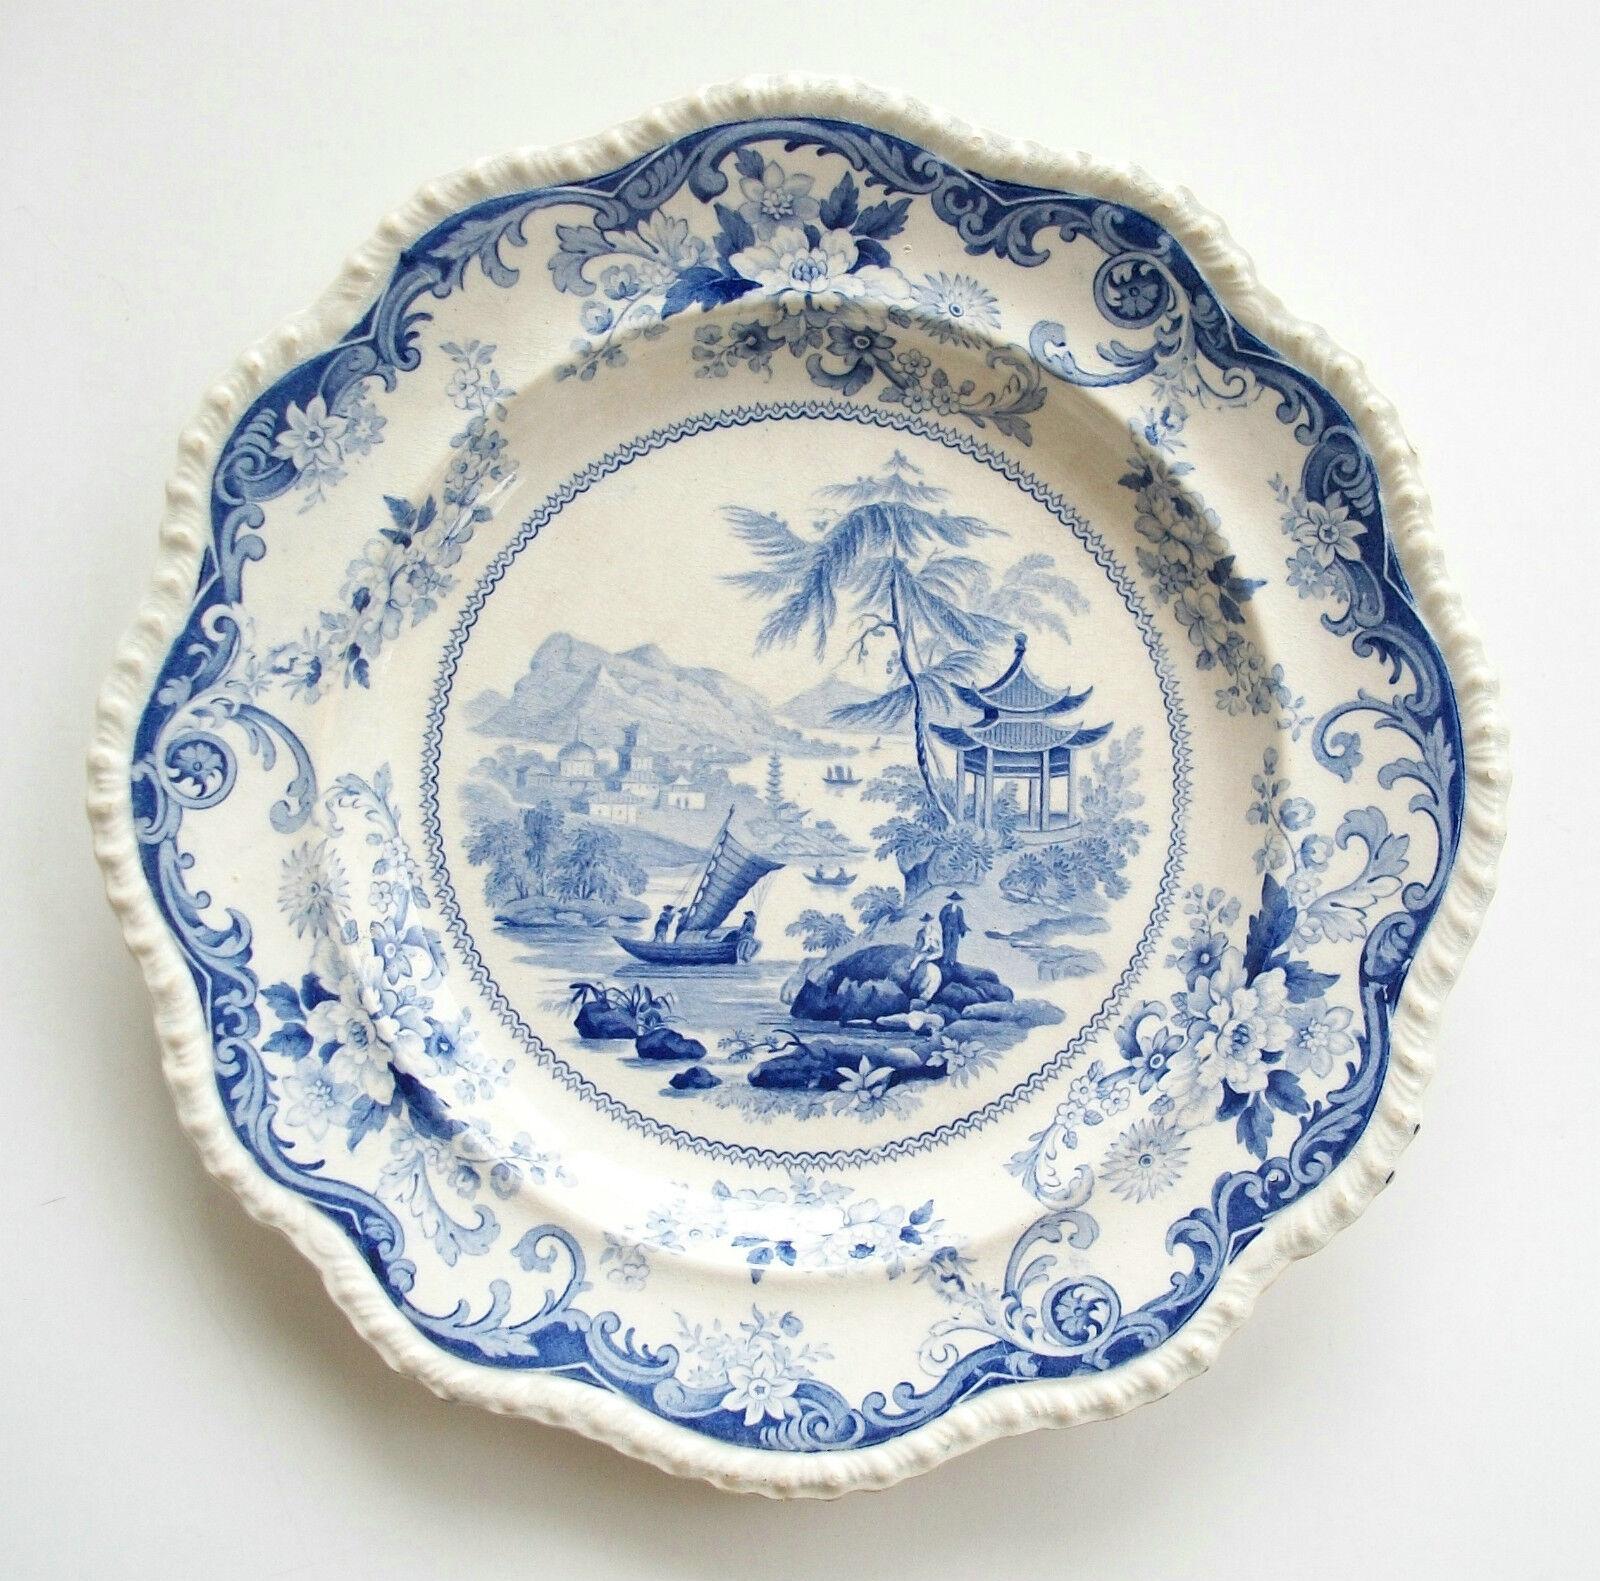 ELKIN KNIGHT & BRIDGWOOD - Canton Views - Rare antique transfer decorated ceramic dinner plate - blue and white - impressed factory stamp & transfer label verso - Staffordshire - United Kingdom - circa 1830.

Excellent antique condition - minor